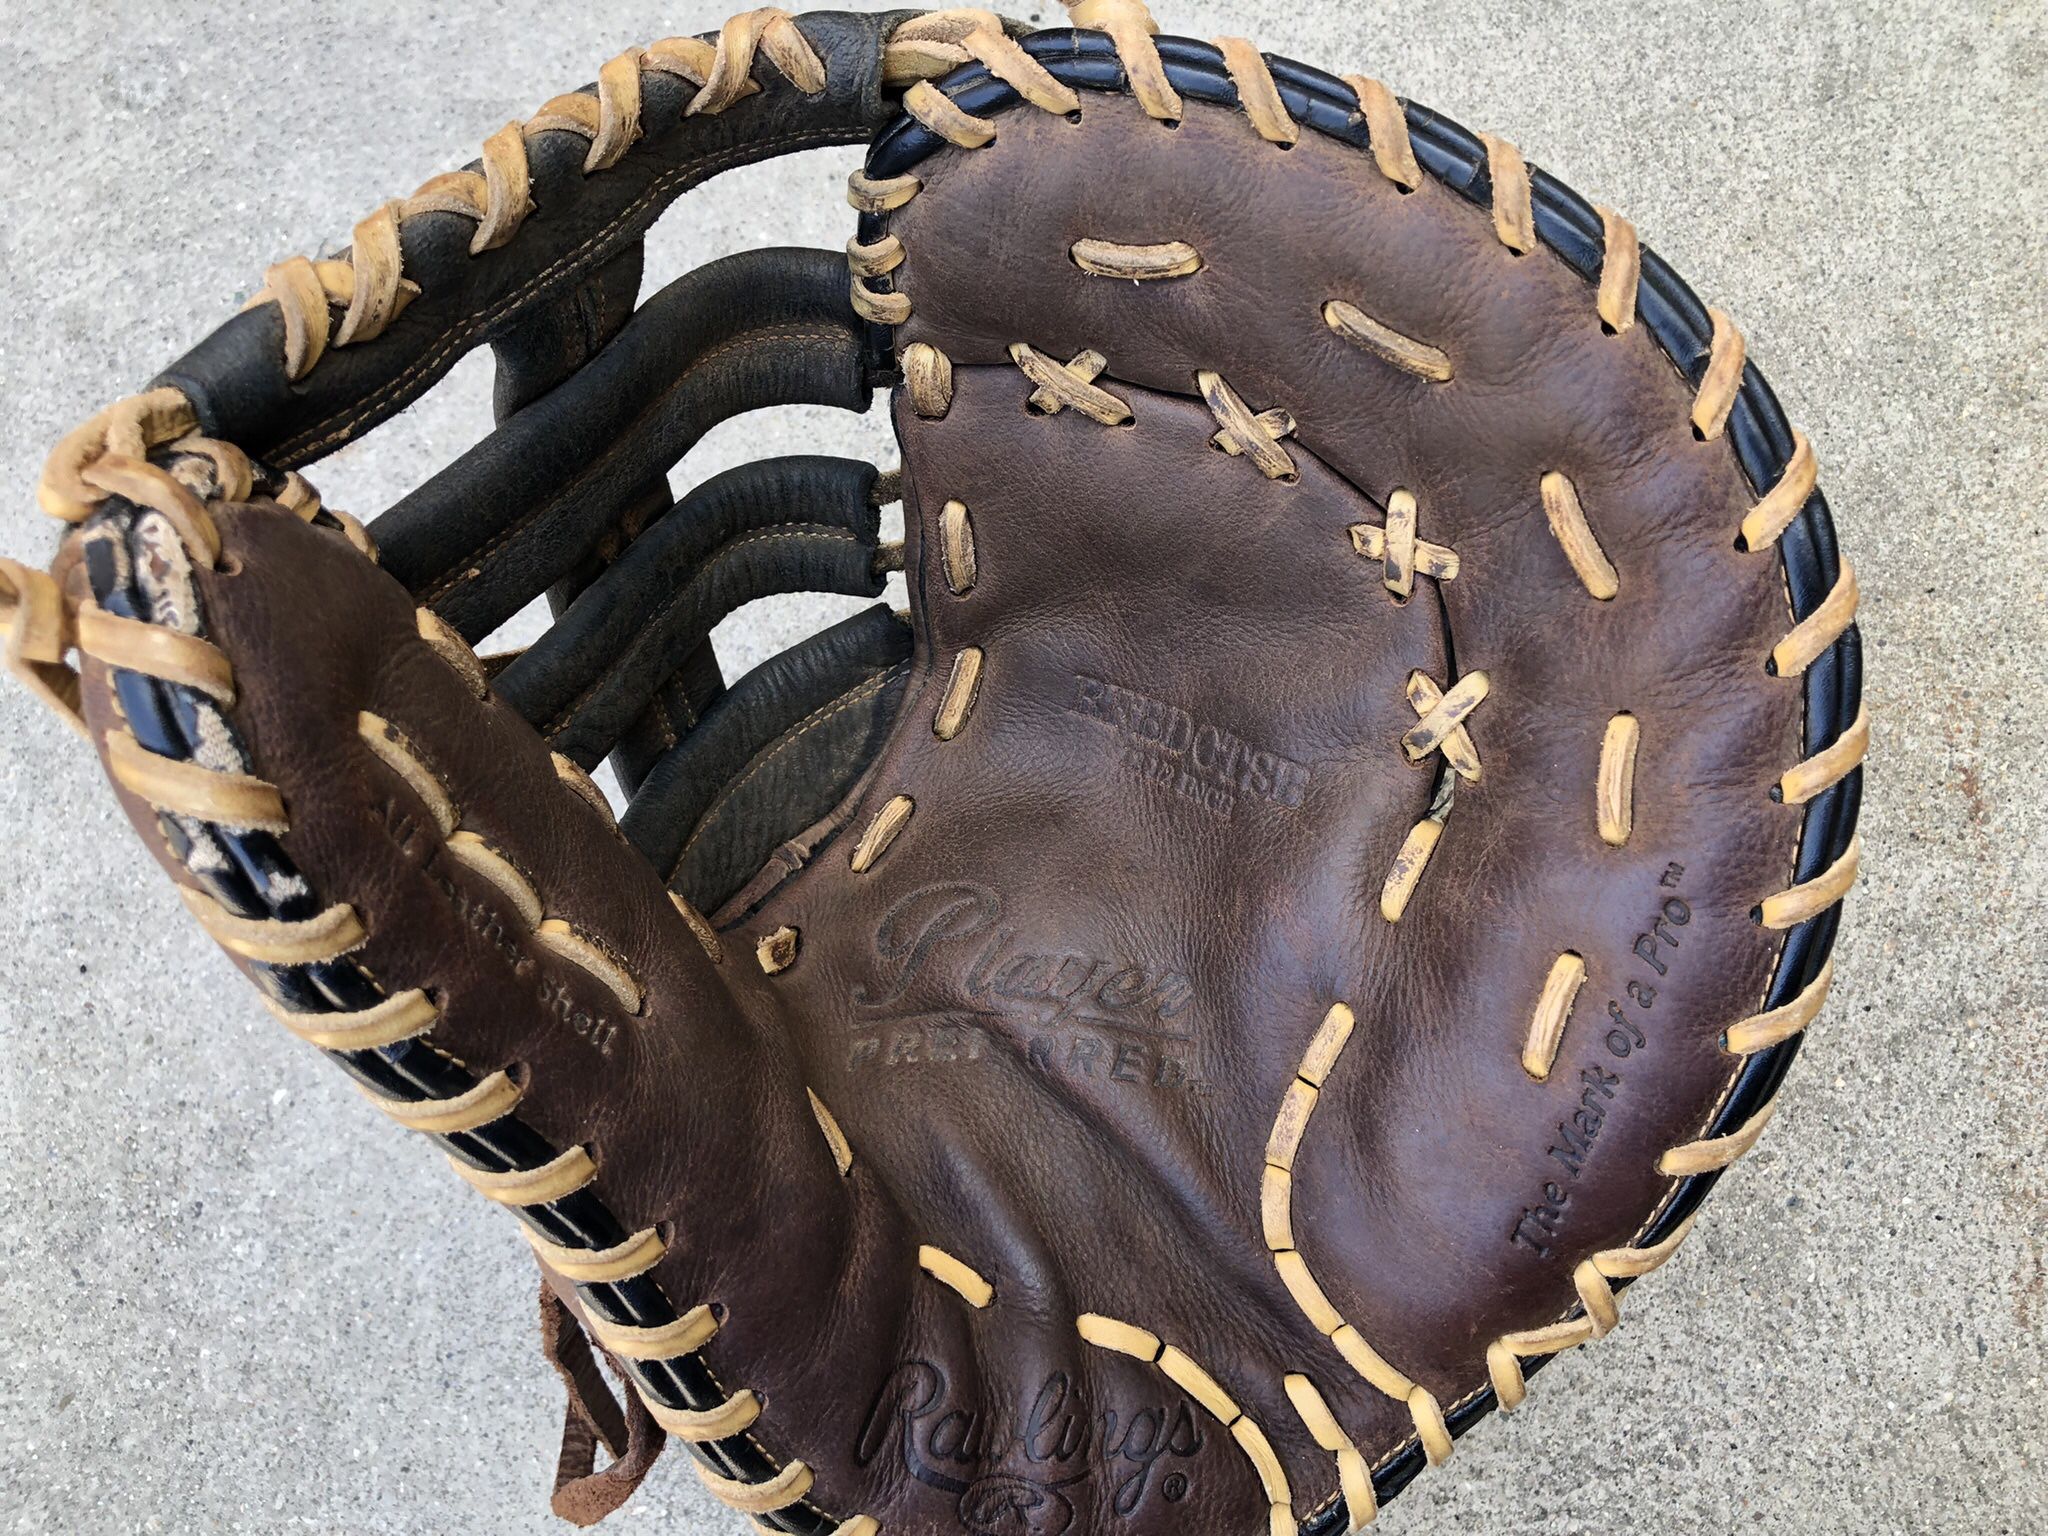 Rawlings First Baseman Baseball Glove Sz 12 1/2” In Excellent Condition Have More Equipment 